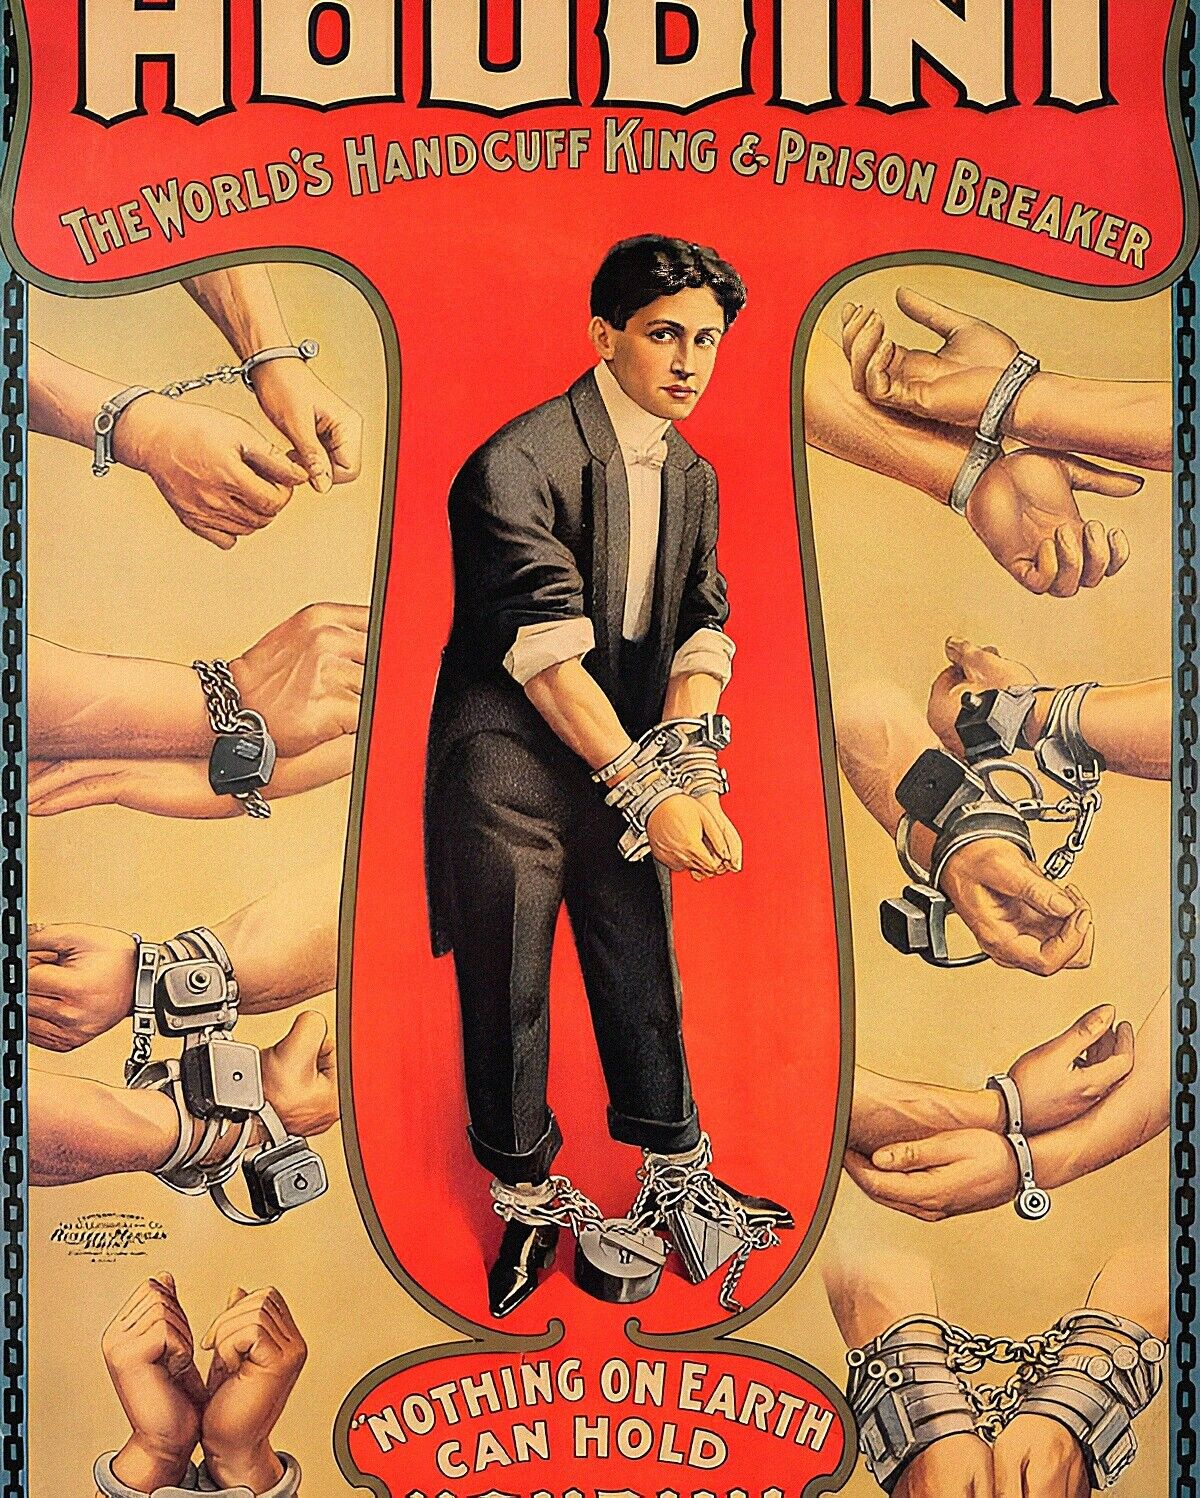 Vintage Colored Houdini Handcuff King Prison Breaker Poster on Magnet 2.5 x 3.5\